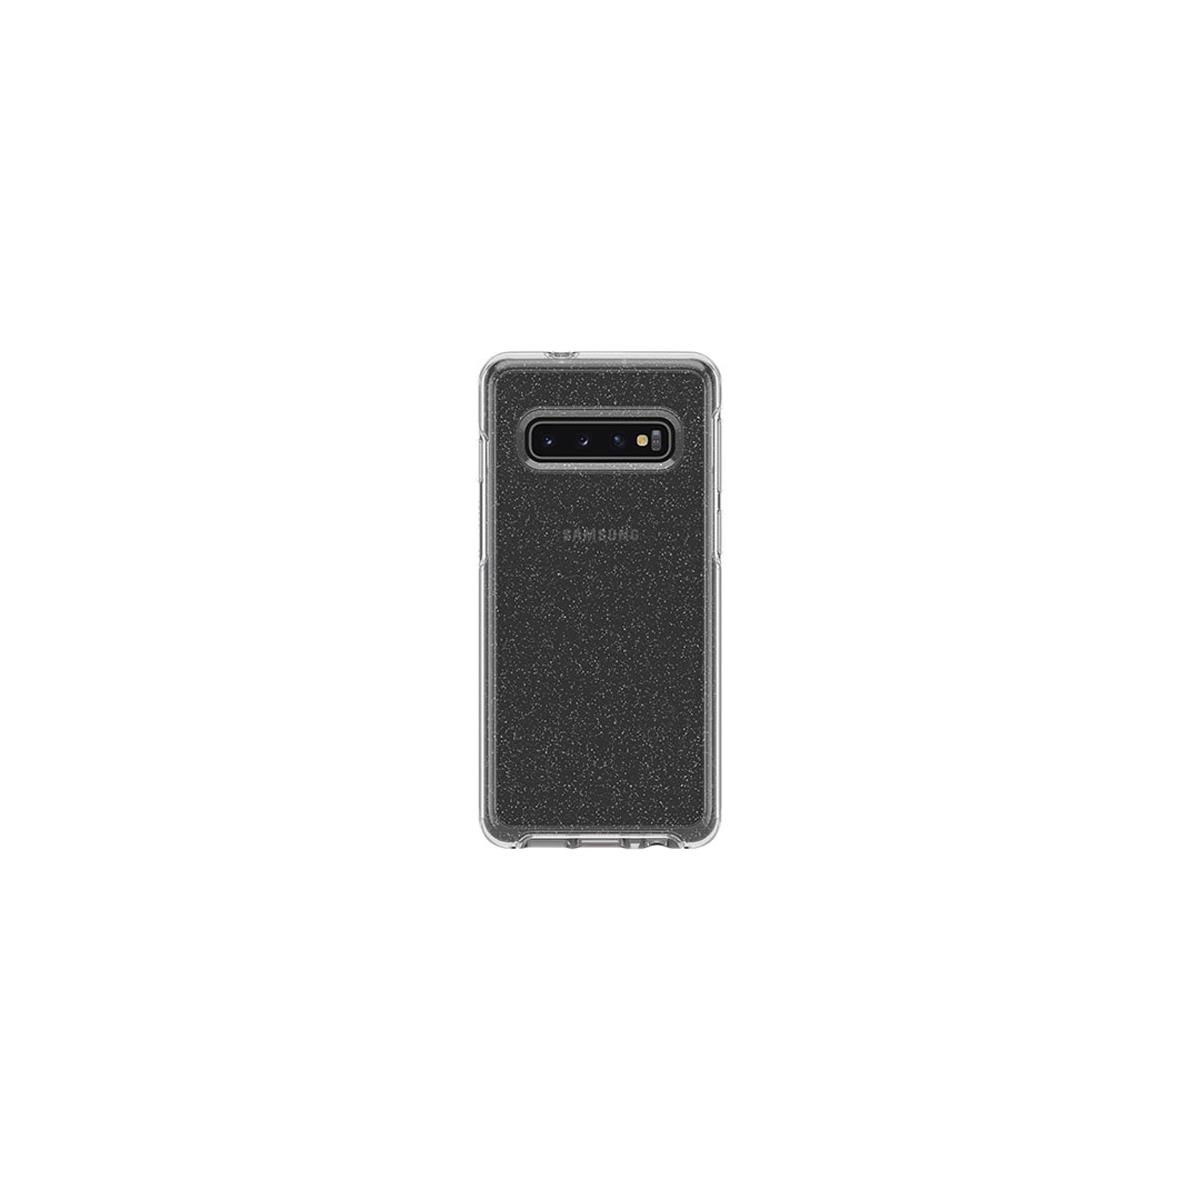 Image of OtterBox Symmetry Case for Samsung Galaxy S10 Smartphone